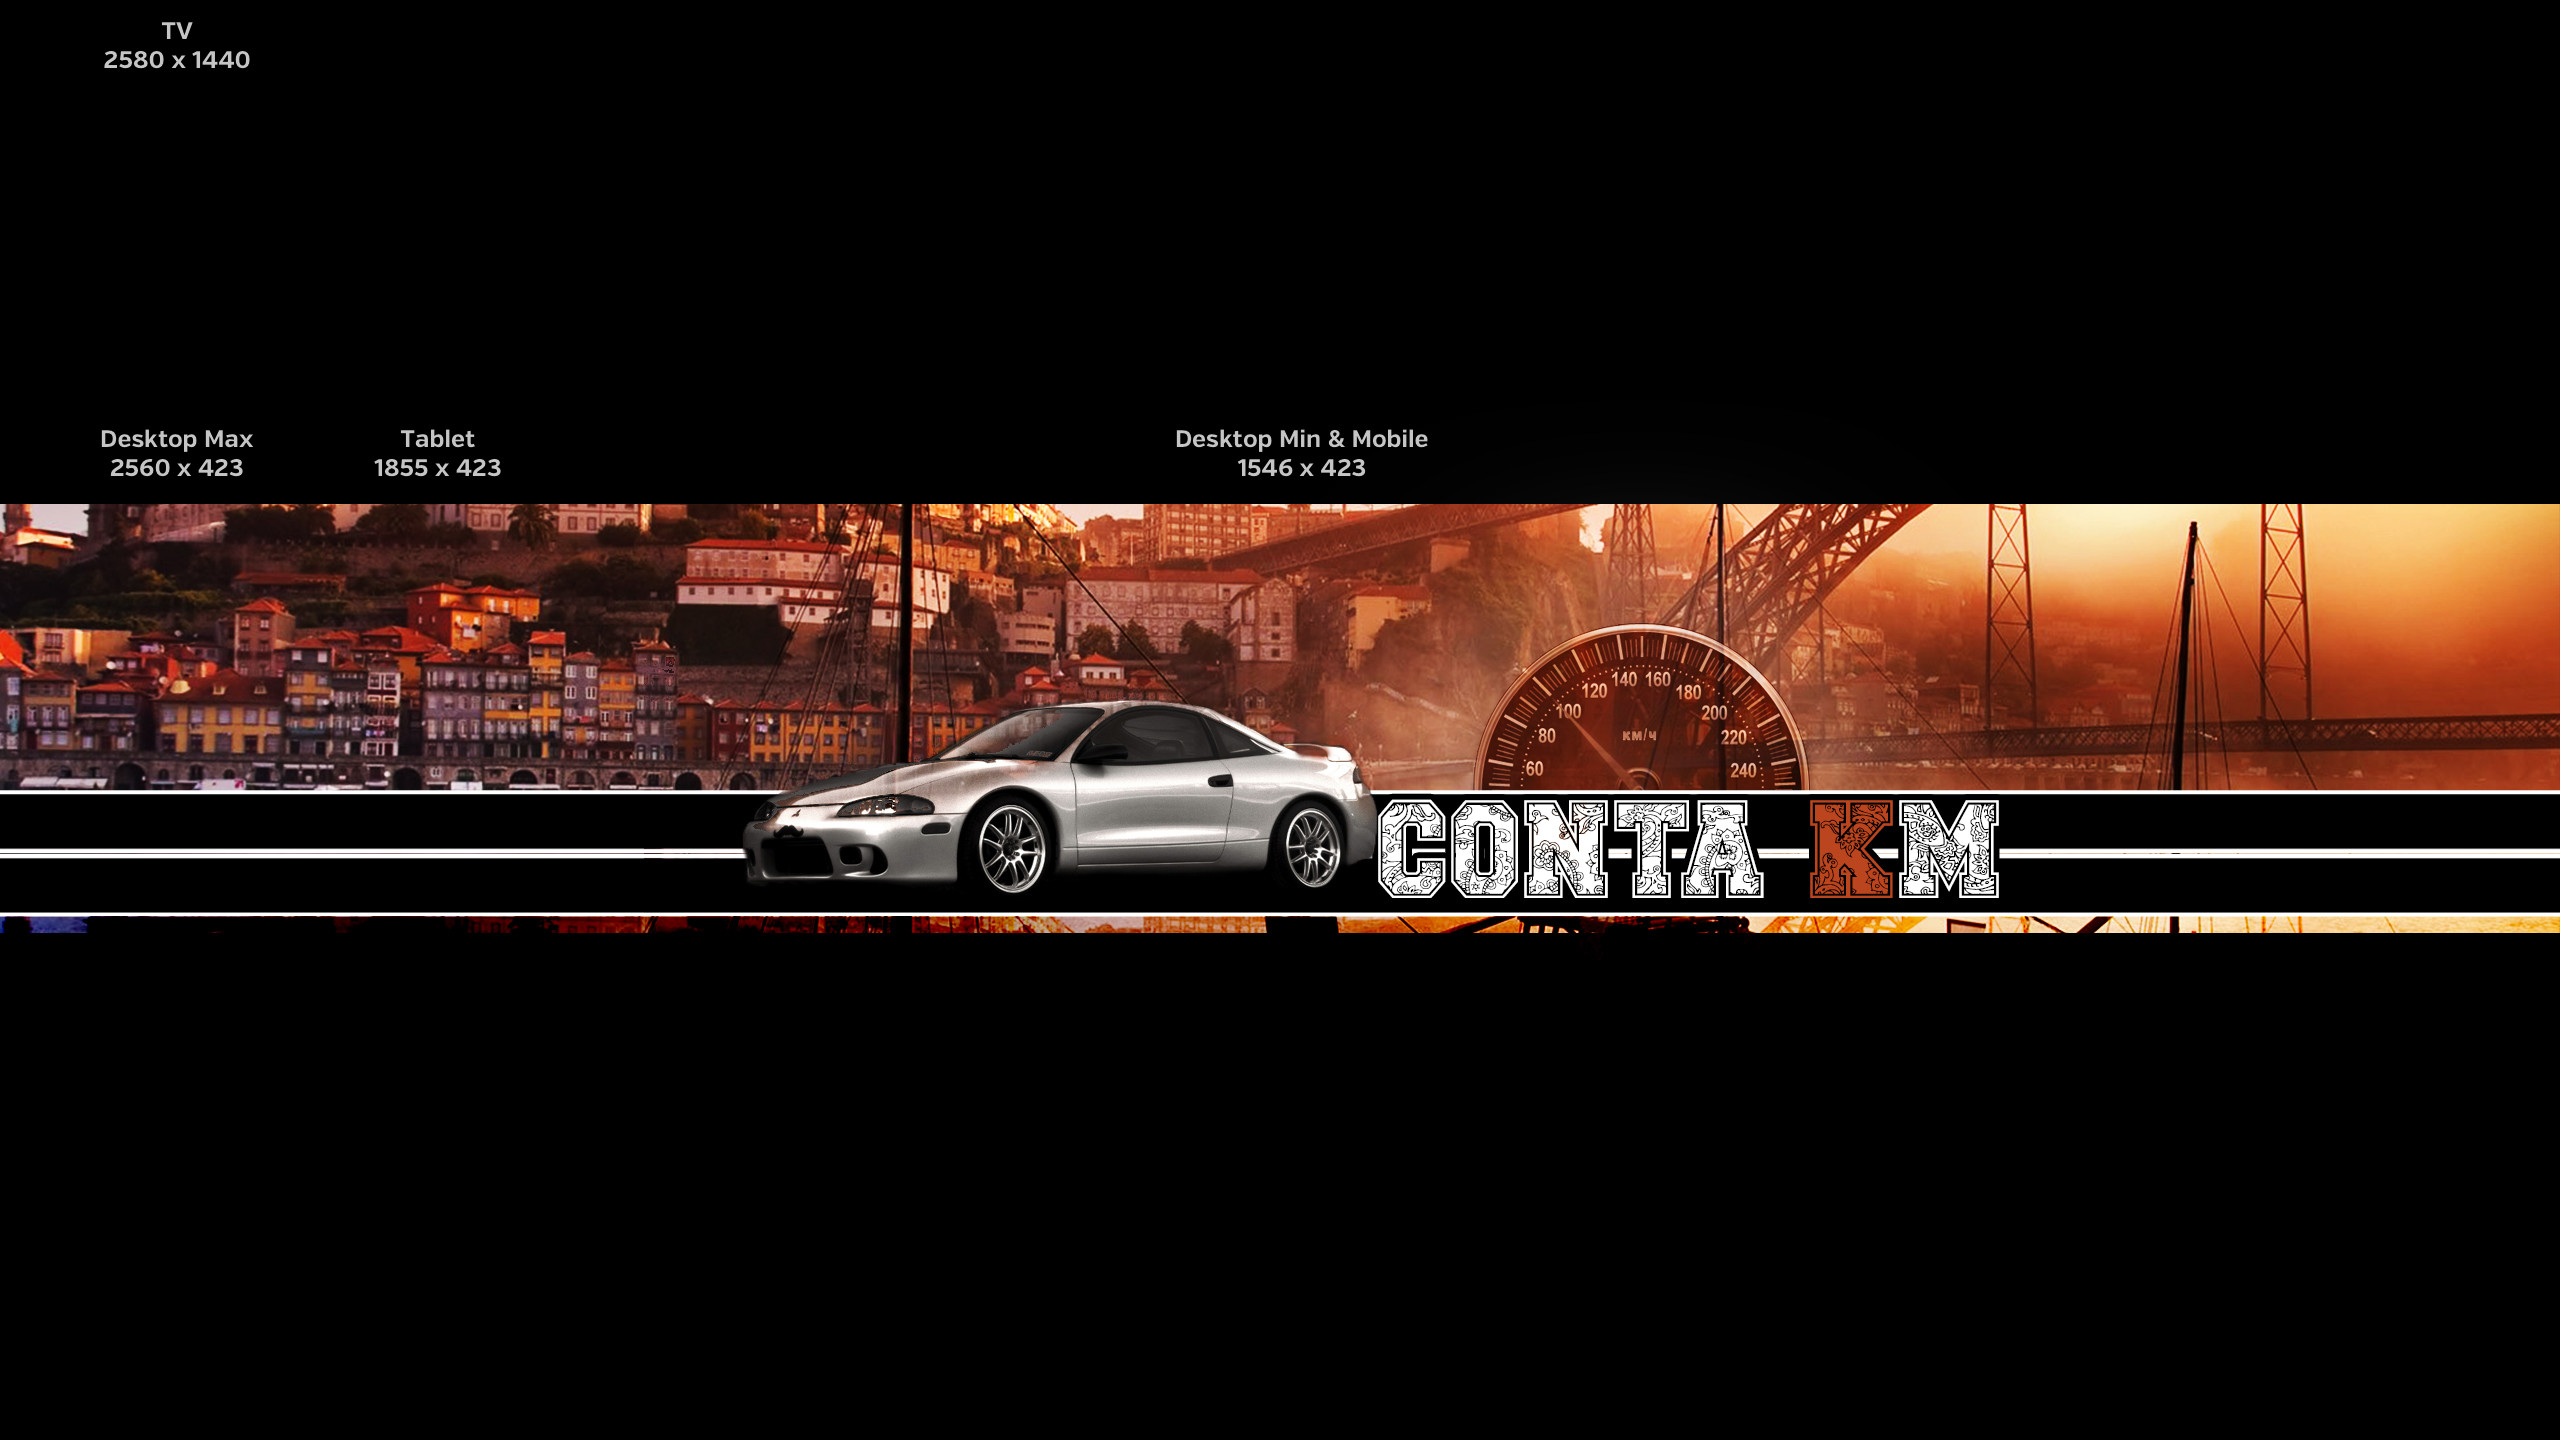 2560x1440 This is the banner that I'm working for my Car Channel, wut do you guys  think? Wut would you change? I'm not very experienced with photoshop!